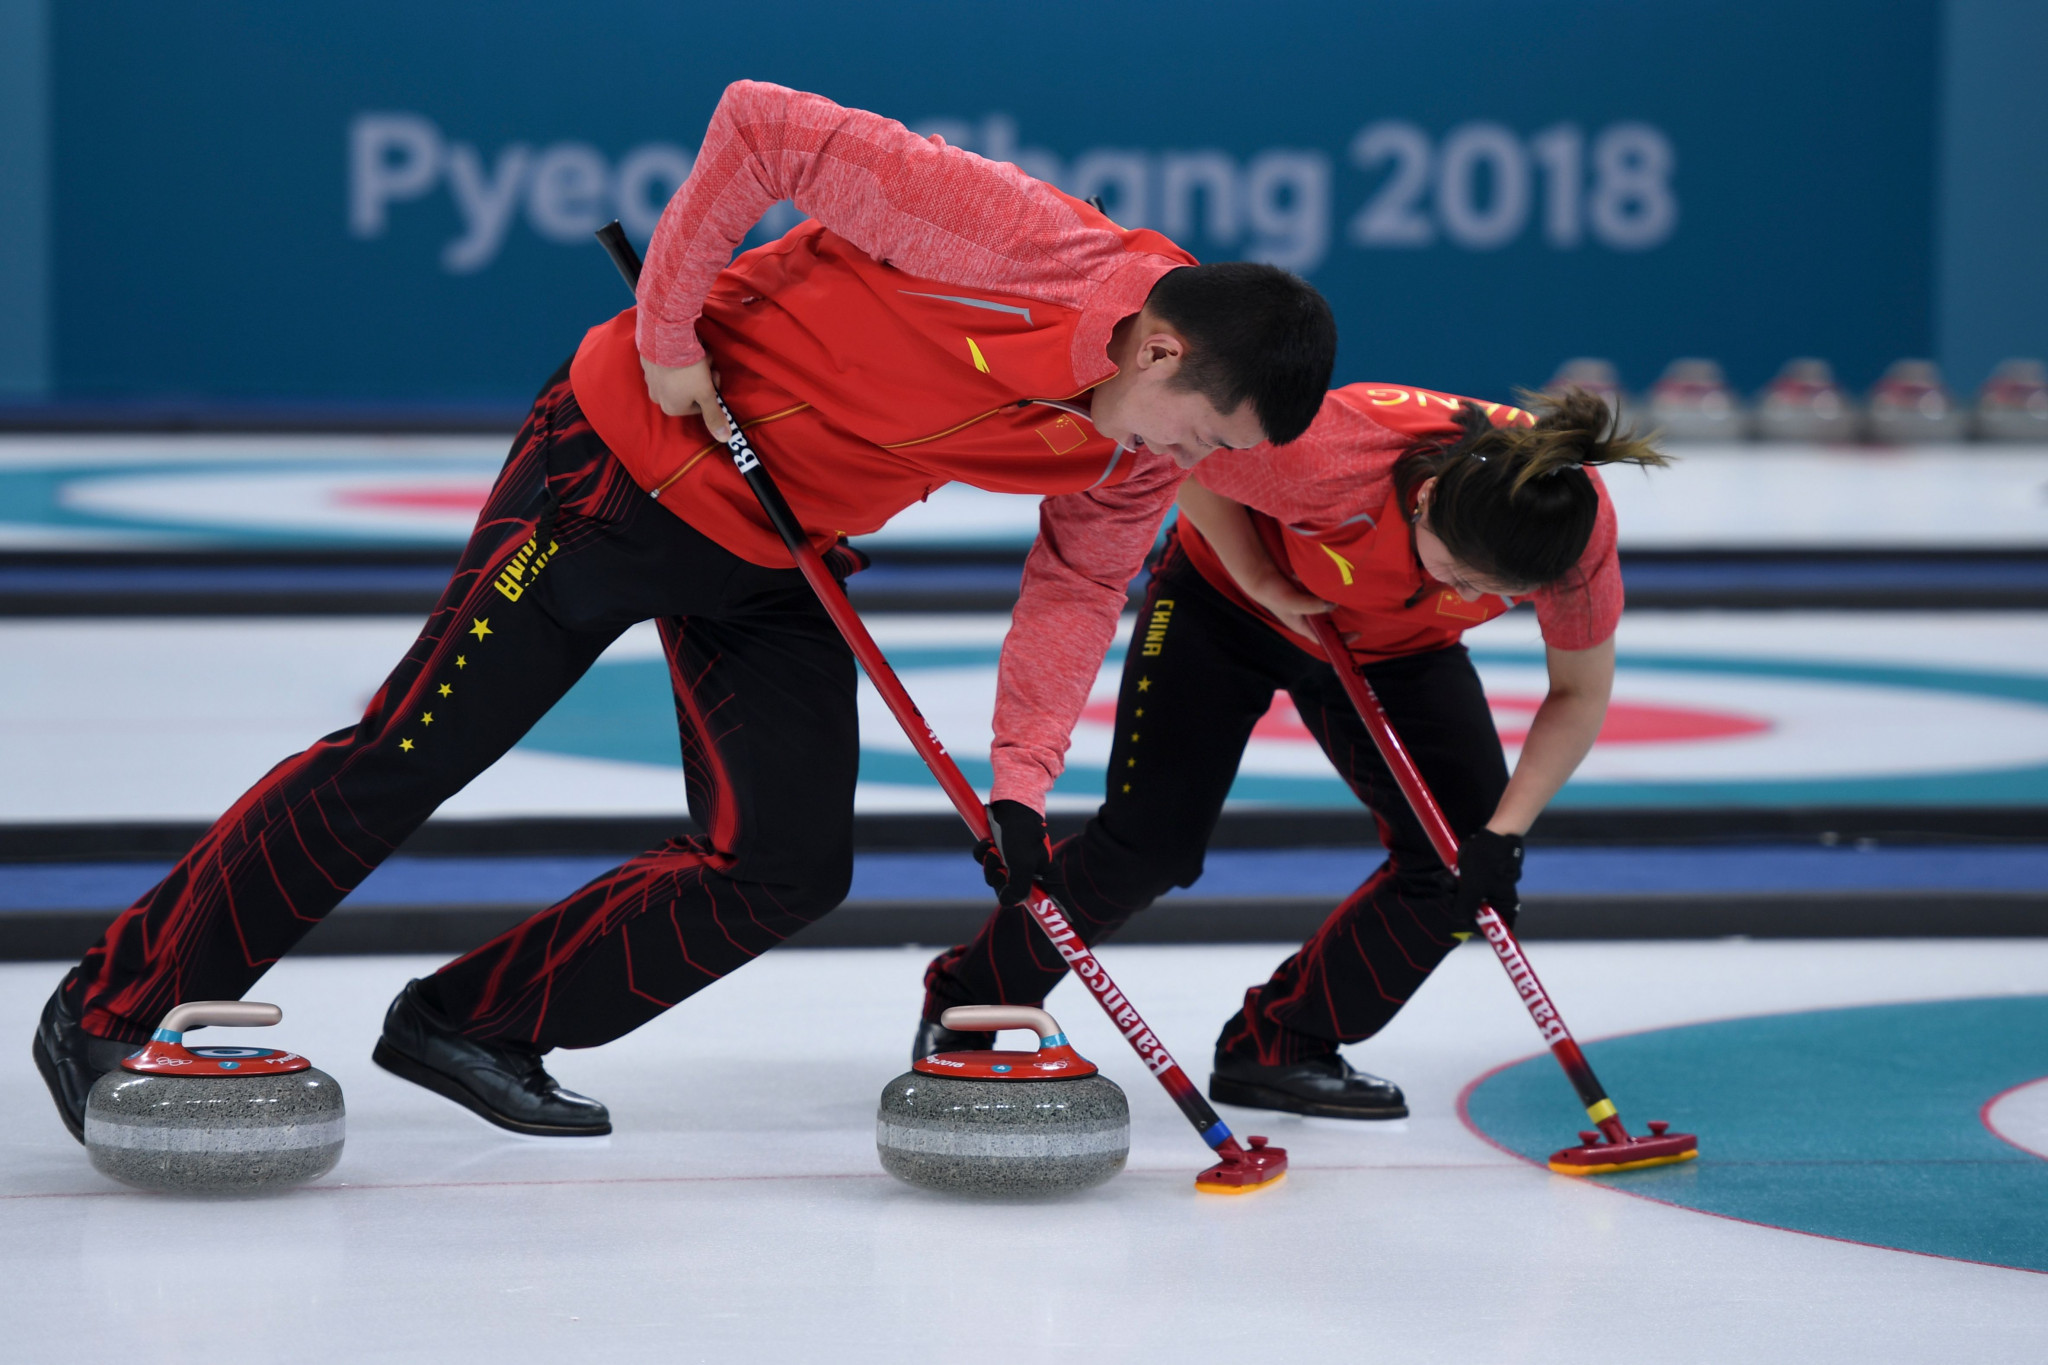 China has expanded its national curling squad in preparation for their home Beijing 2022 Winter Olympics ©Getty Images